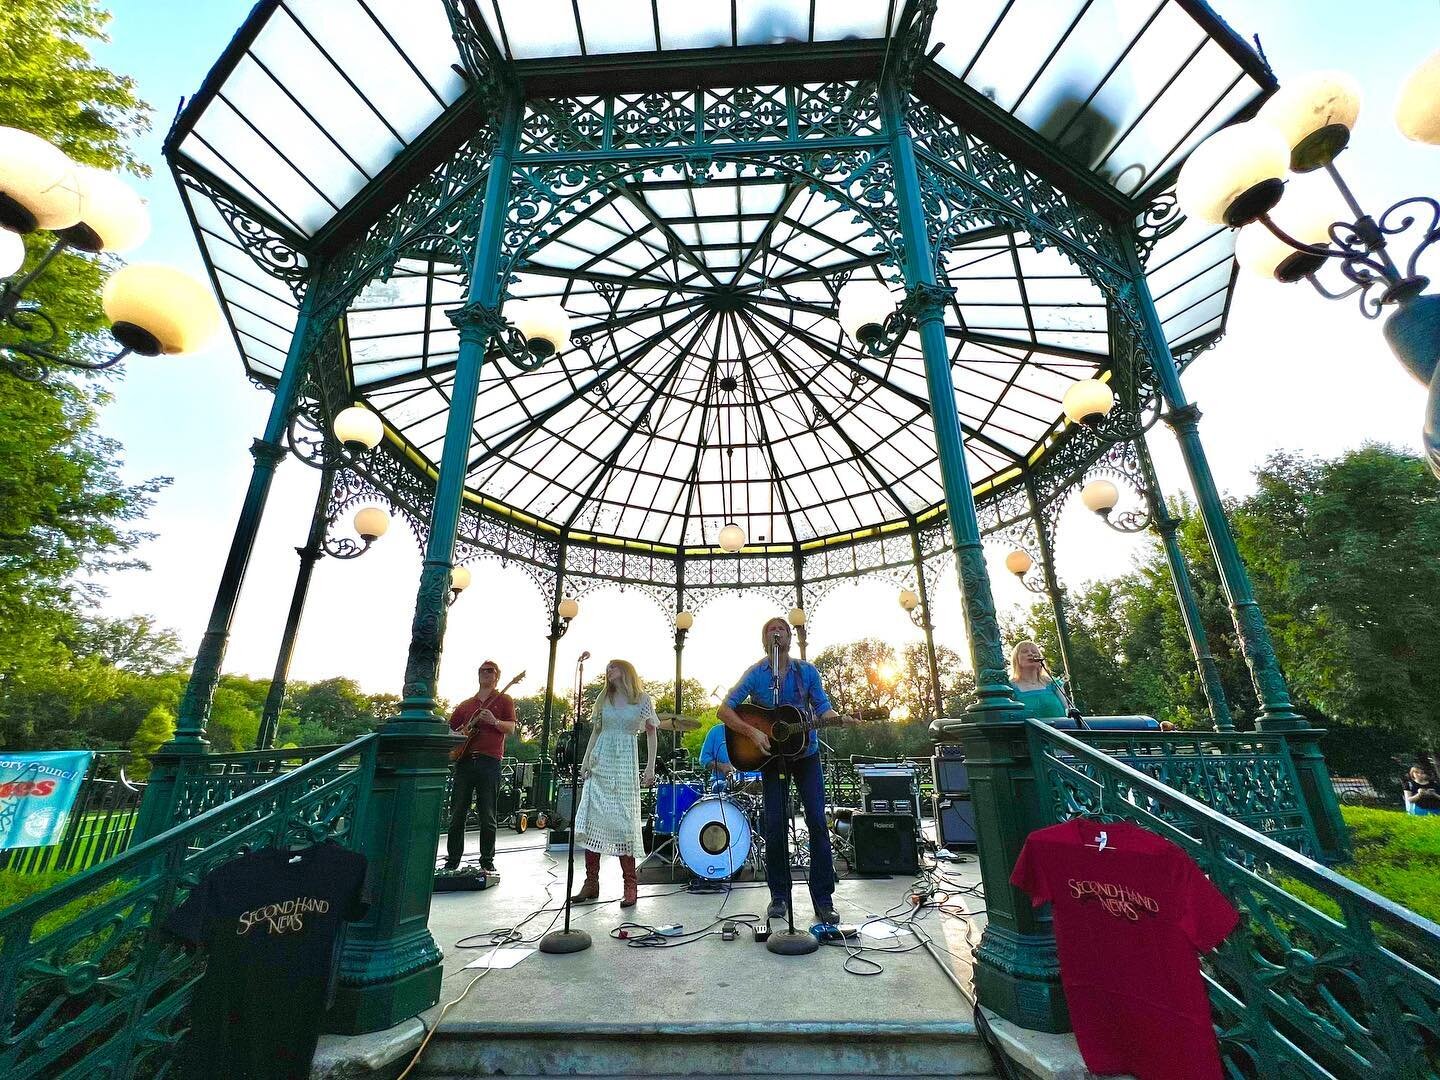 Thanks to everybody who came out to Welles Park last night! We had a great time sharing a beautiful summer evening with all of you. 
📸:@cmsphenry_ 
.
.
.
.

#fleetwoodmac #tributeband #classicrock #summertime #gazebo #wellespark #Chicago #stevienick